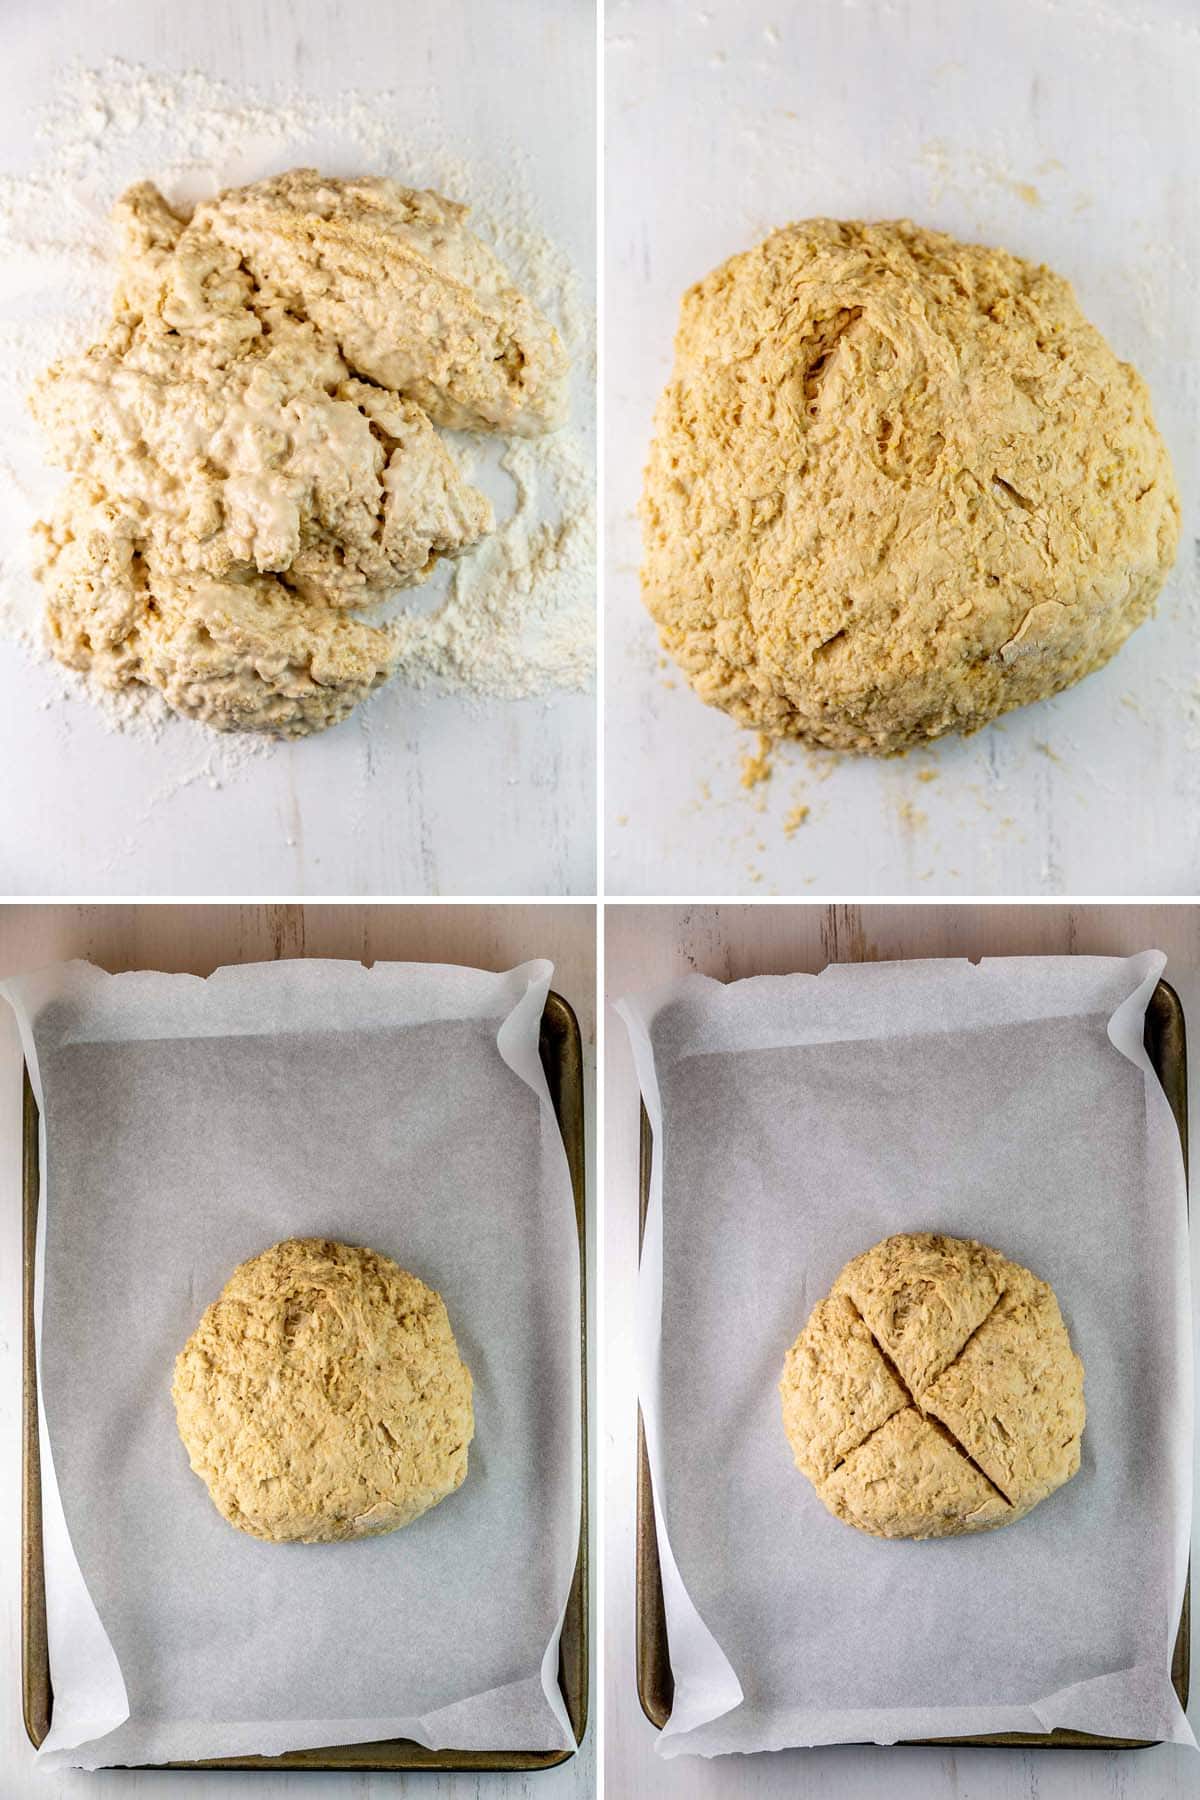 step by step photos showing soda bread dough, shaping into a circle, and scoring with an X before baking